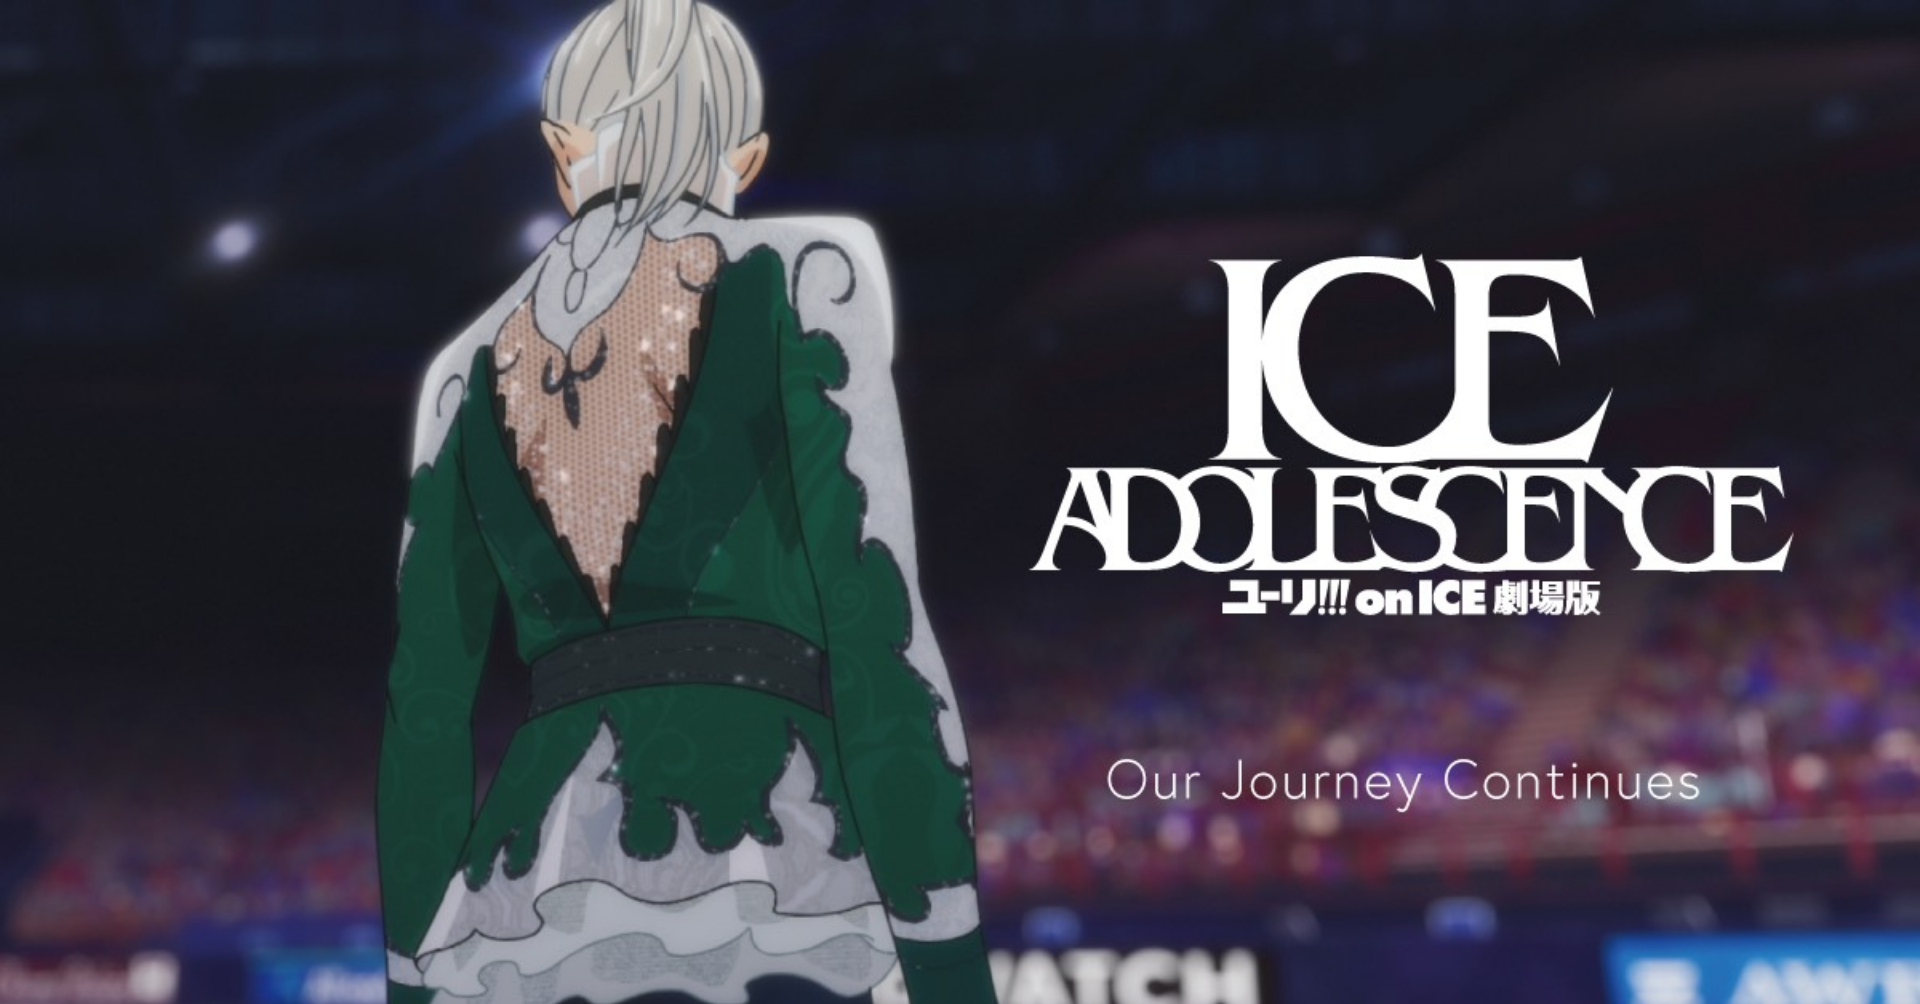 Yuri on Ice Movie Still in Production, No Release Date Yet - Anime Corner